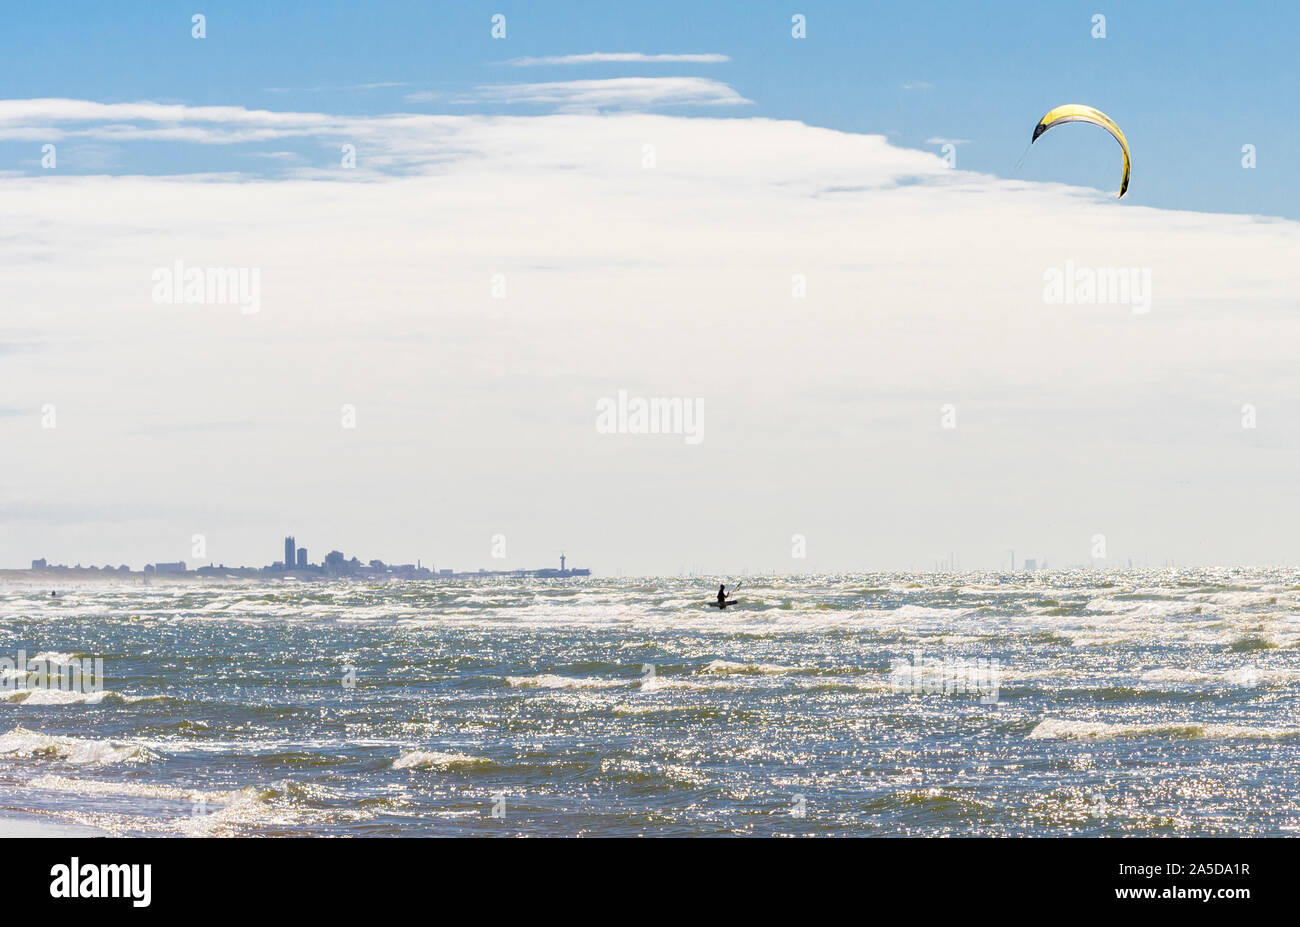 Passing in front of the city skyline of The Haag (Den Haag), a kite surfer is enjoying the stormy North Sea on a beach at Katwijk, Netherlands. Stock Photo